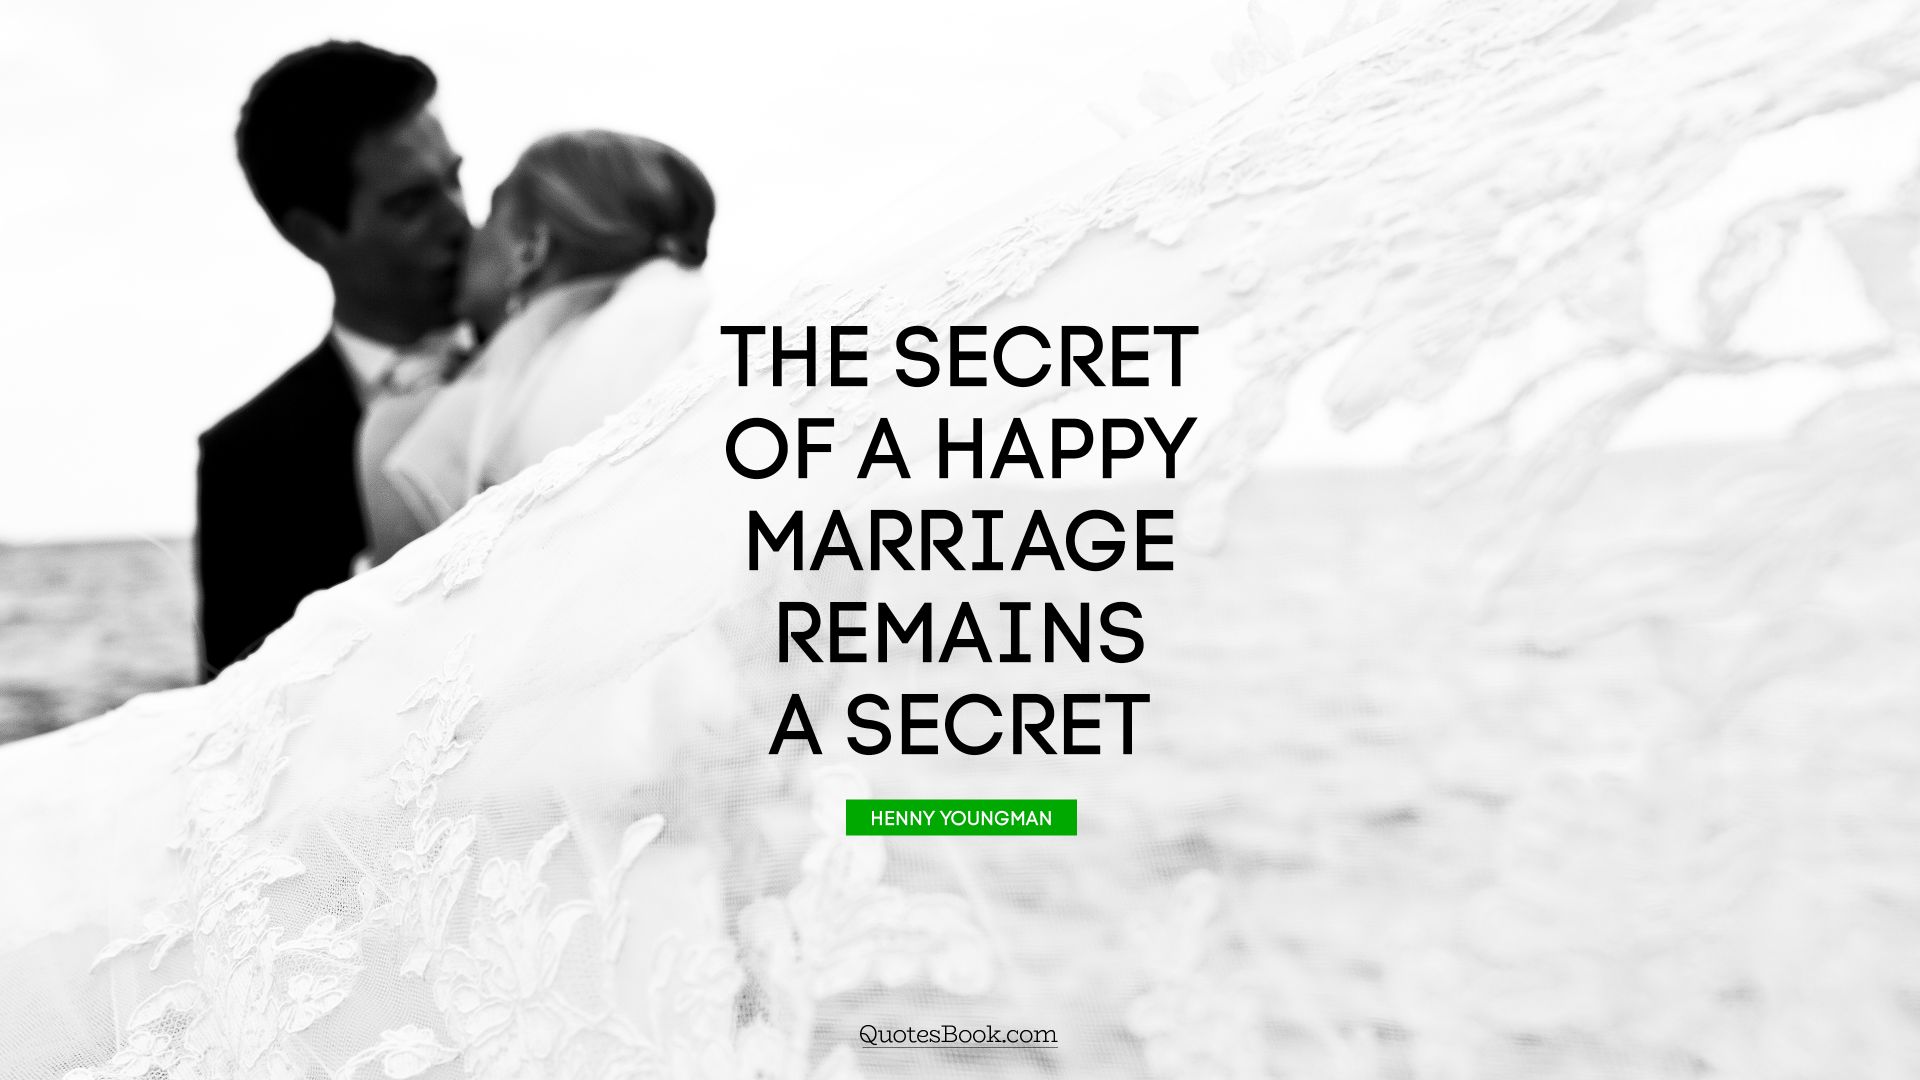 The secret of a happy marriage remains a secret. - Quote by Henny Youngman